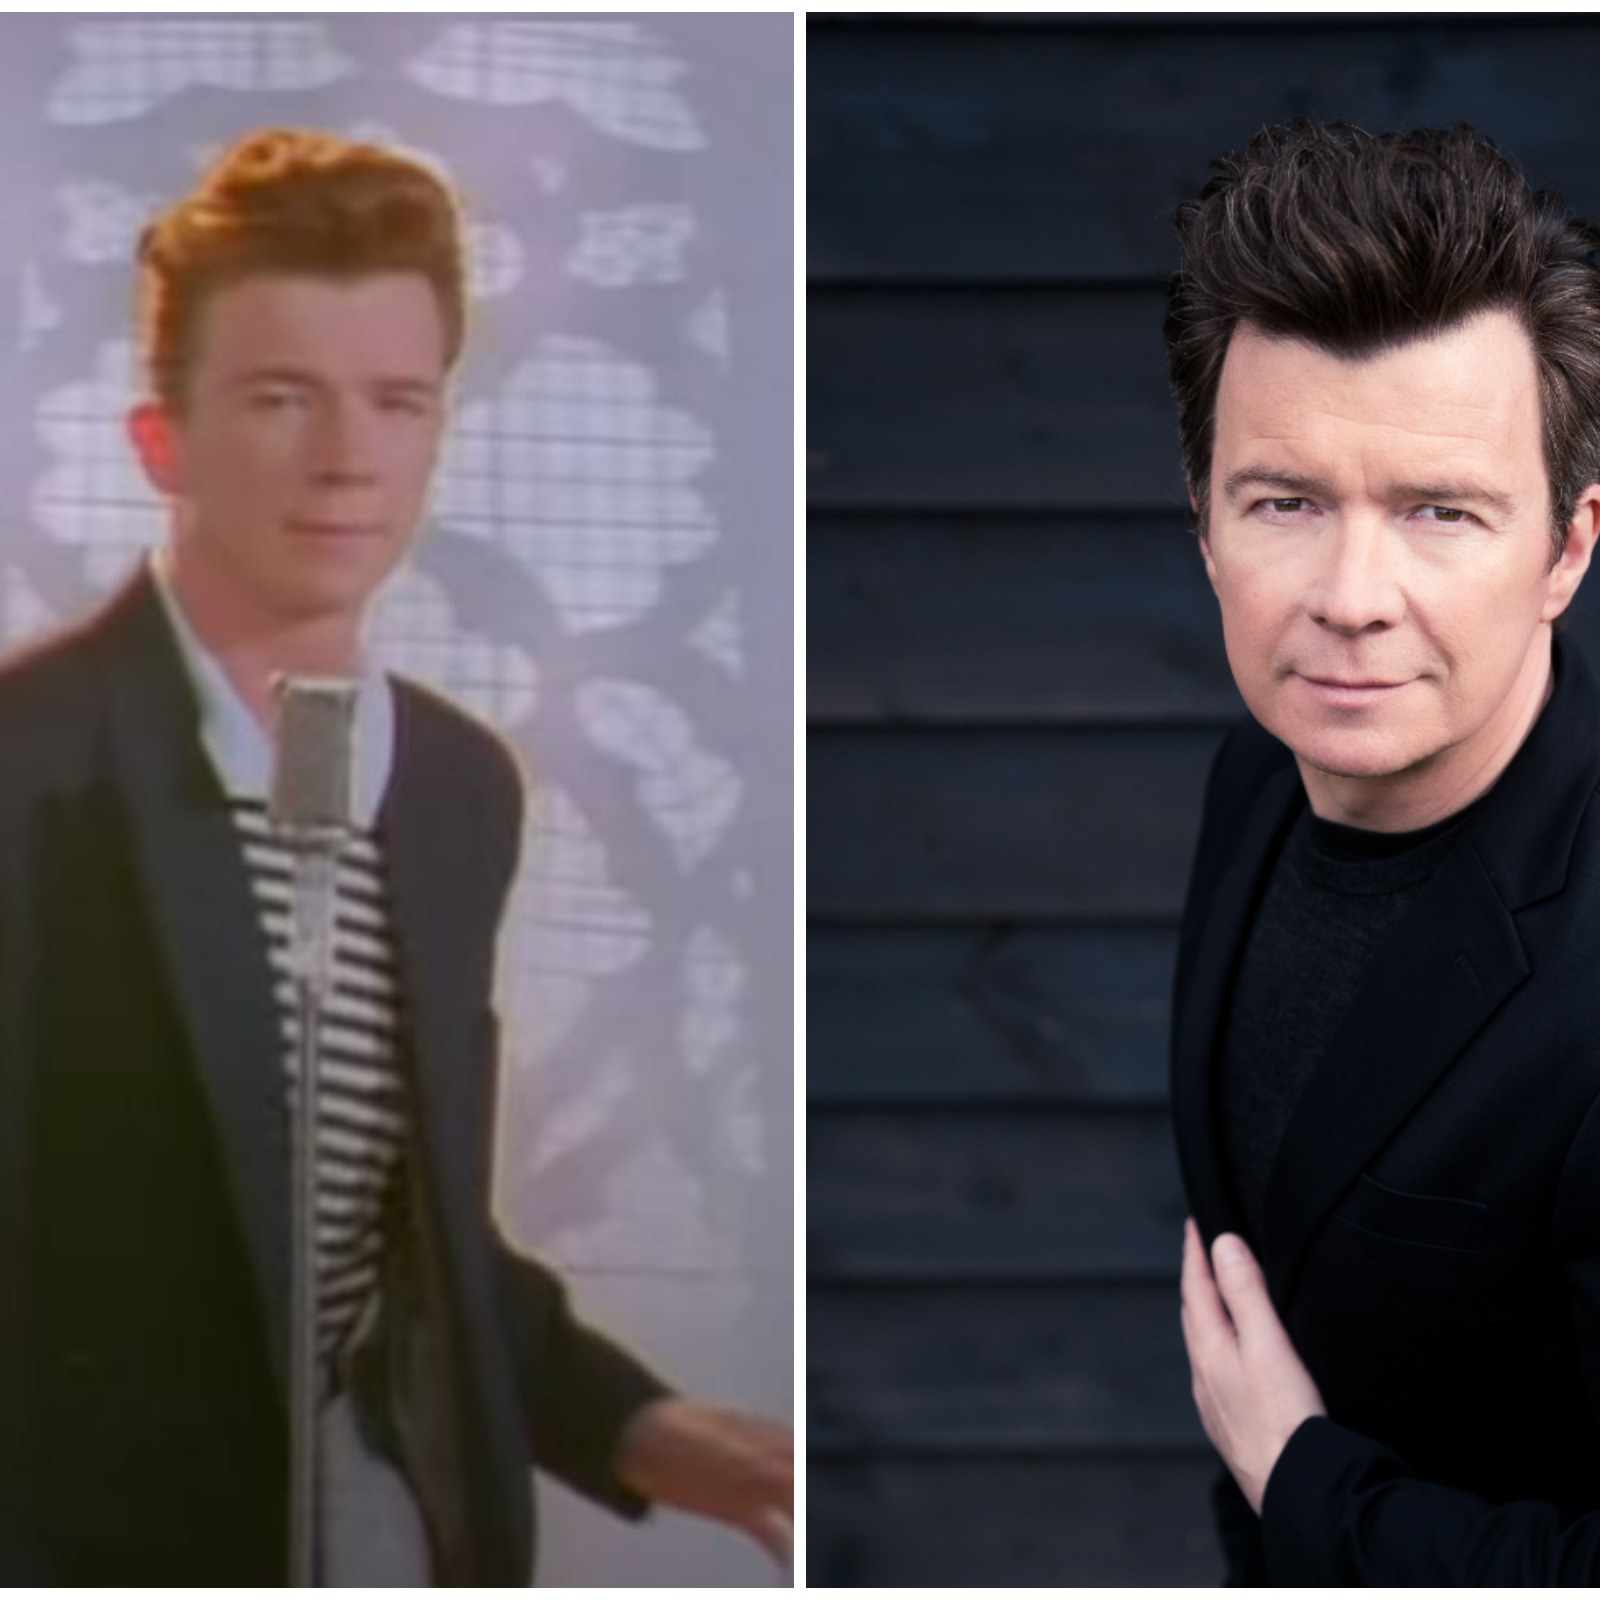 Working Rick Roll Link Checker - Never Get Rick Rolled Again. : r